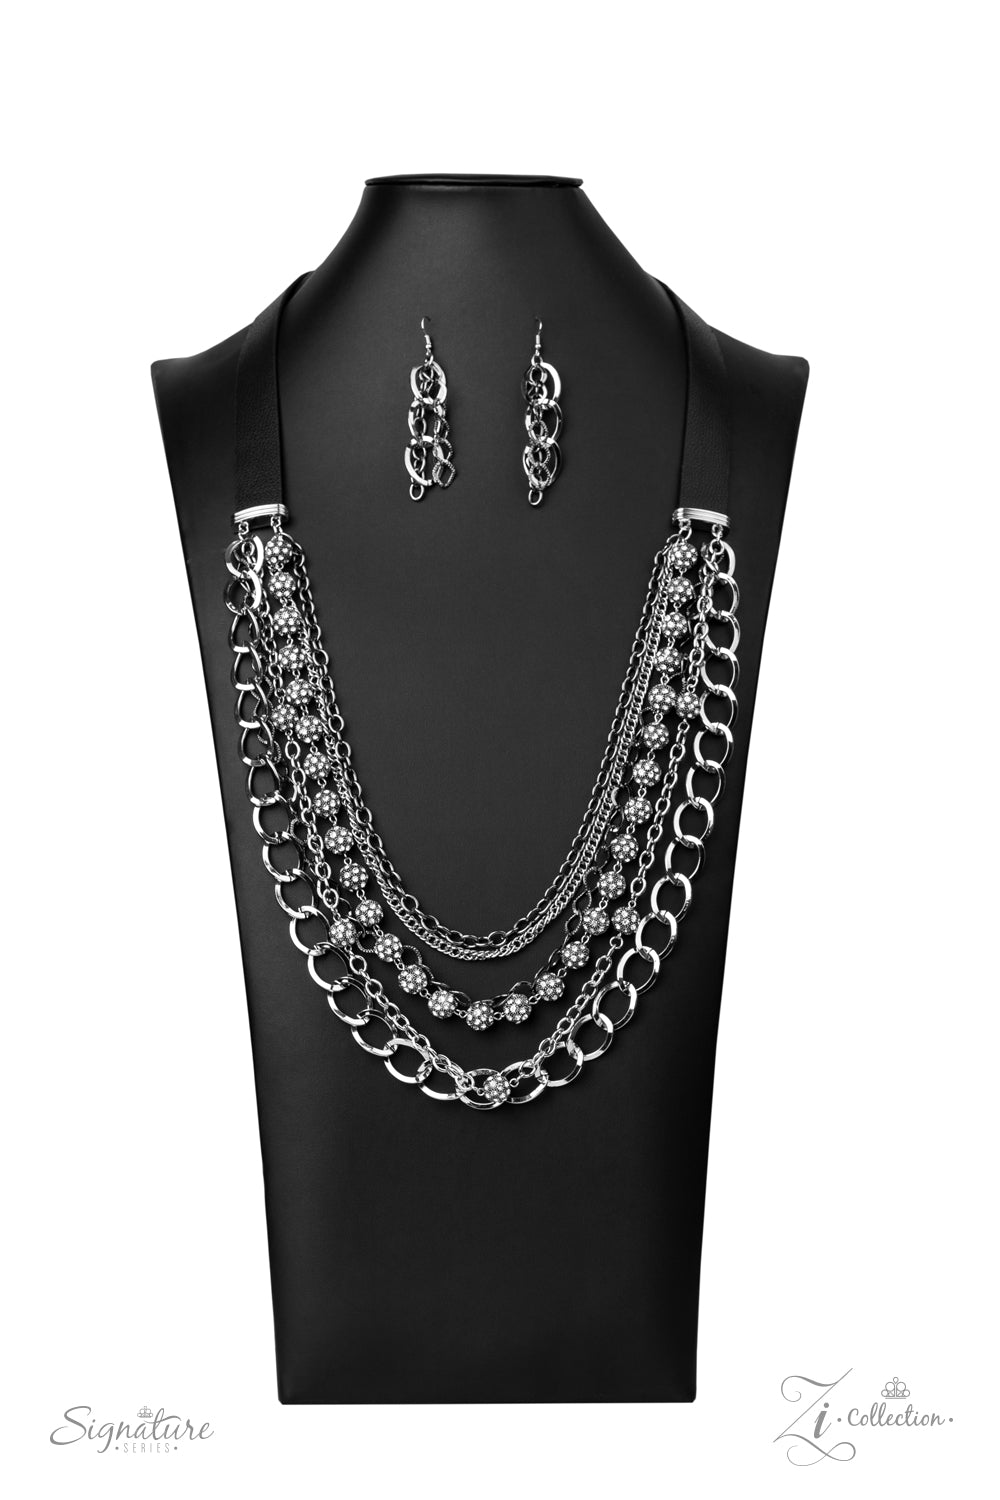 Edgy sparkle, grunge meets glamour in this heart-stopping statement-maker. Features an adjustable clasp closure. 